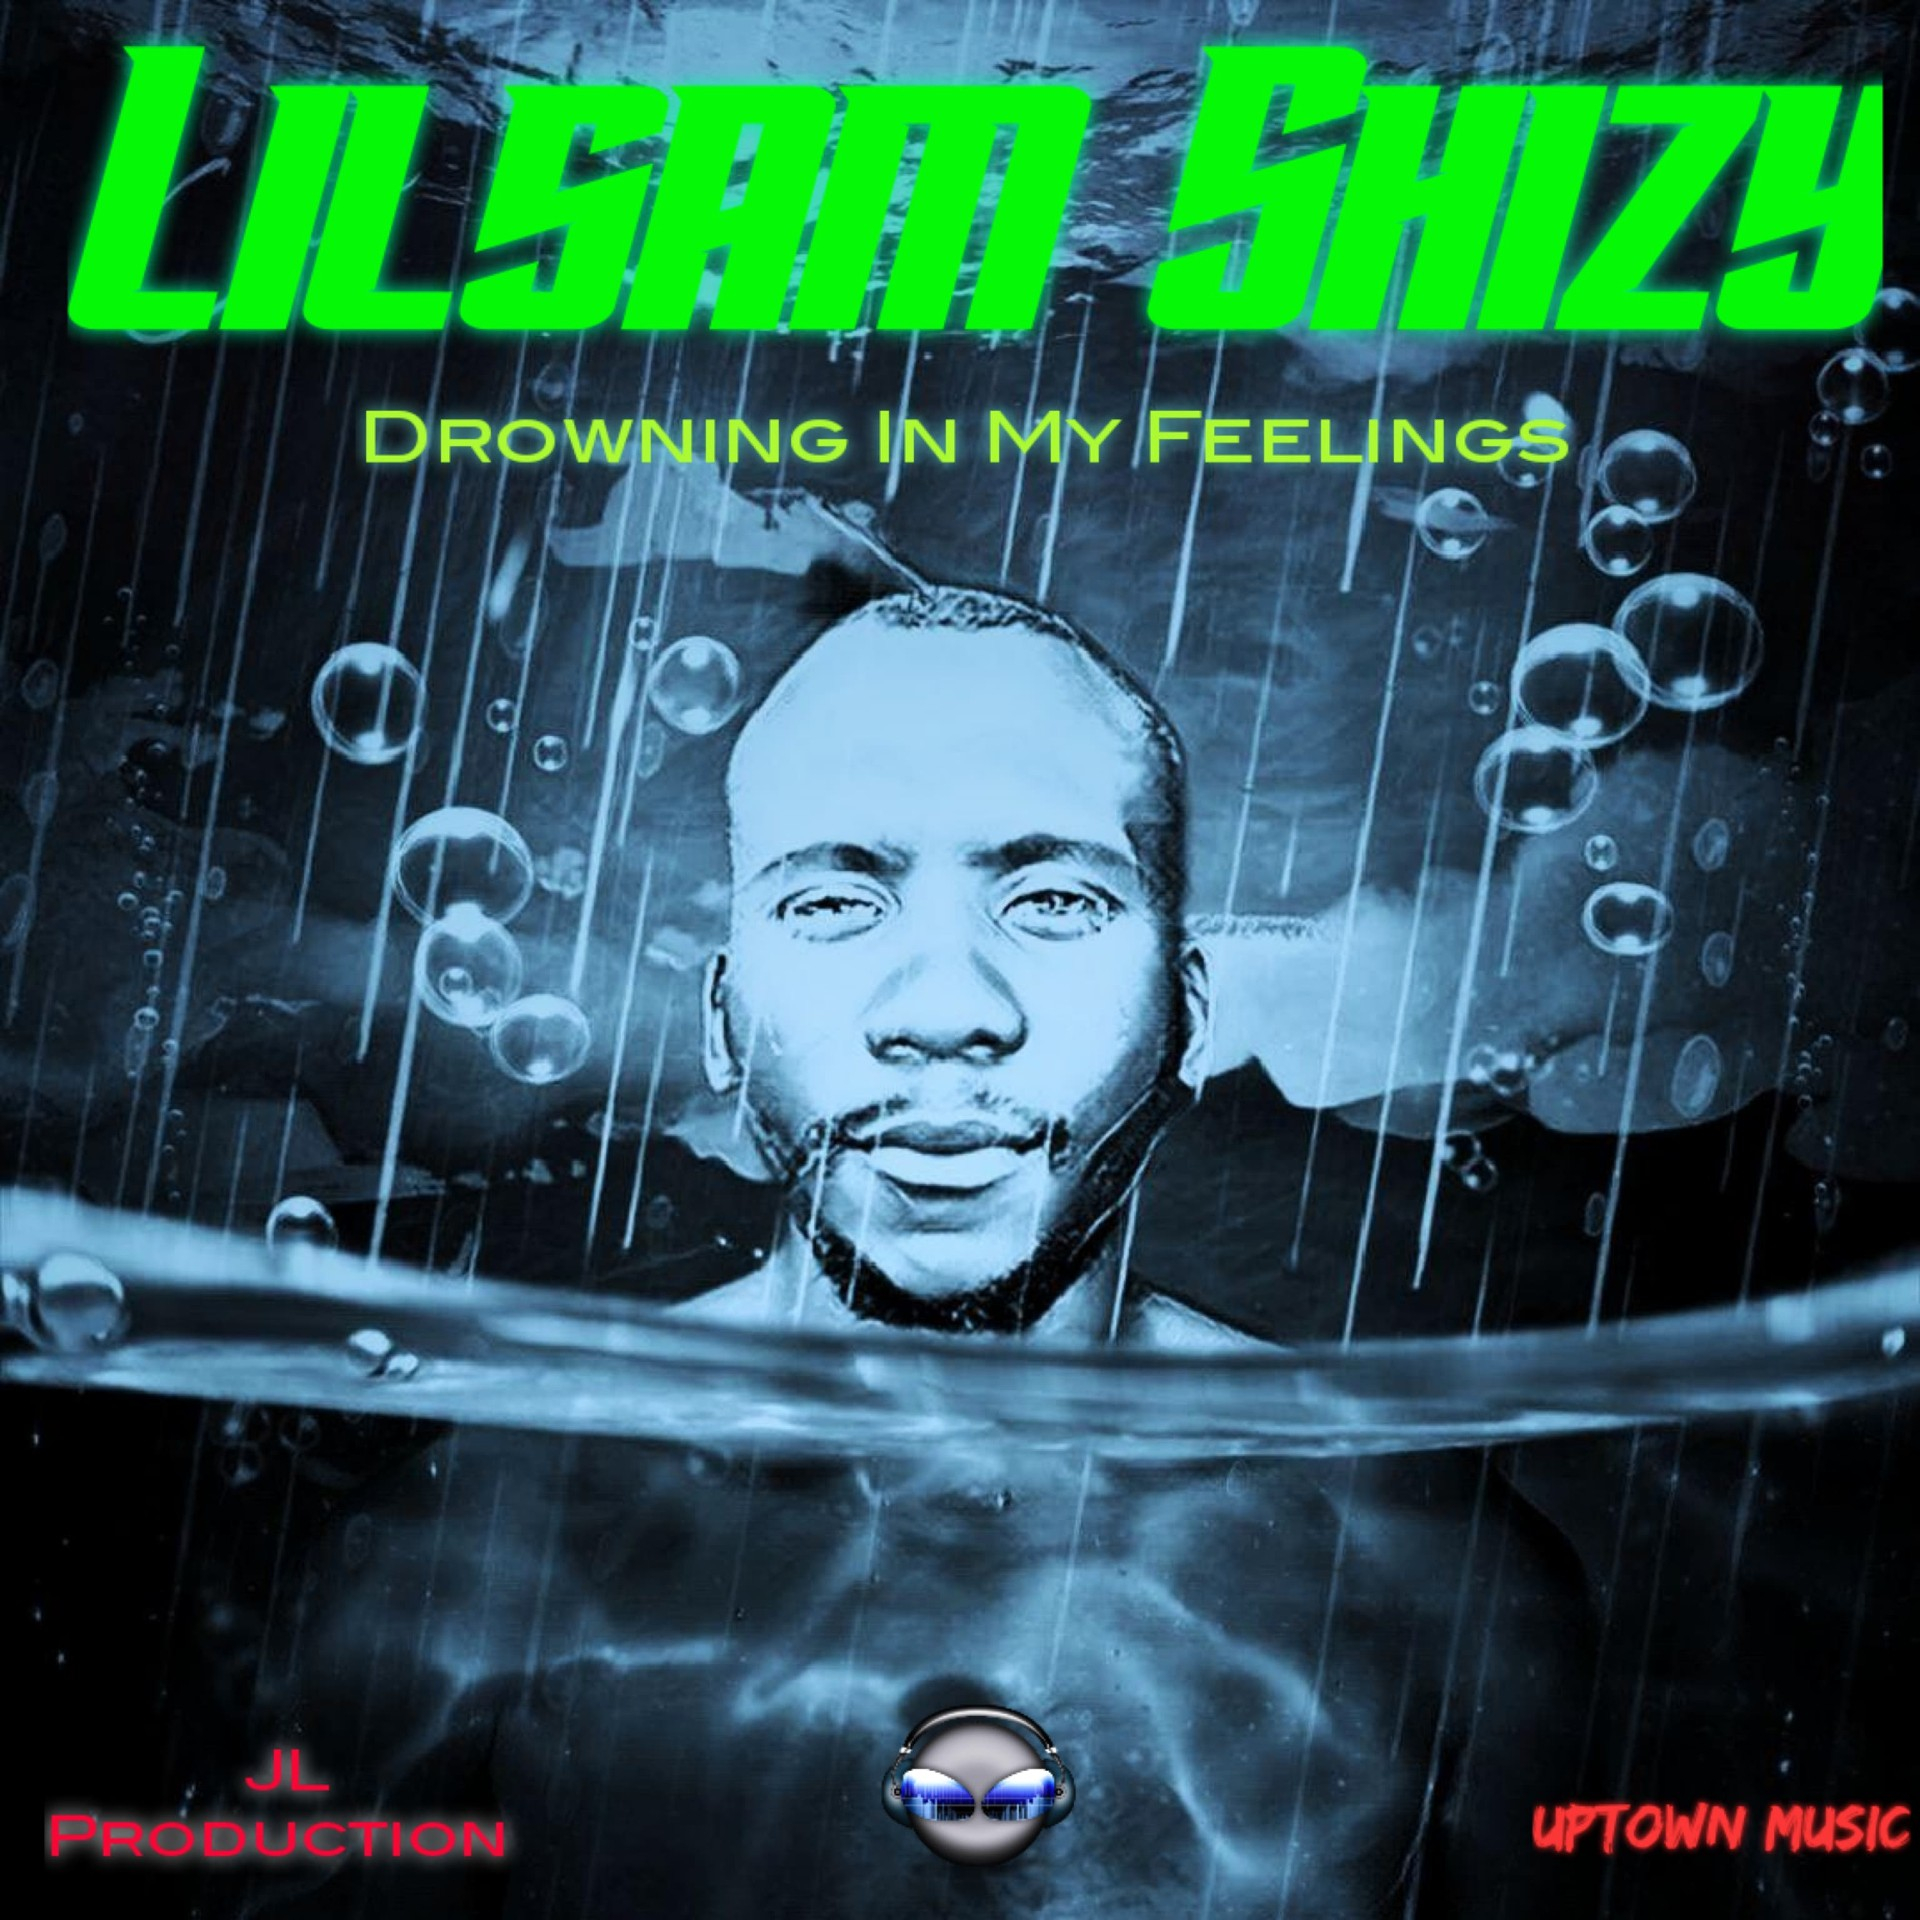 Lilsam Shizy | Drowning in my Feelings